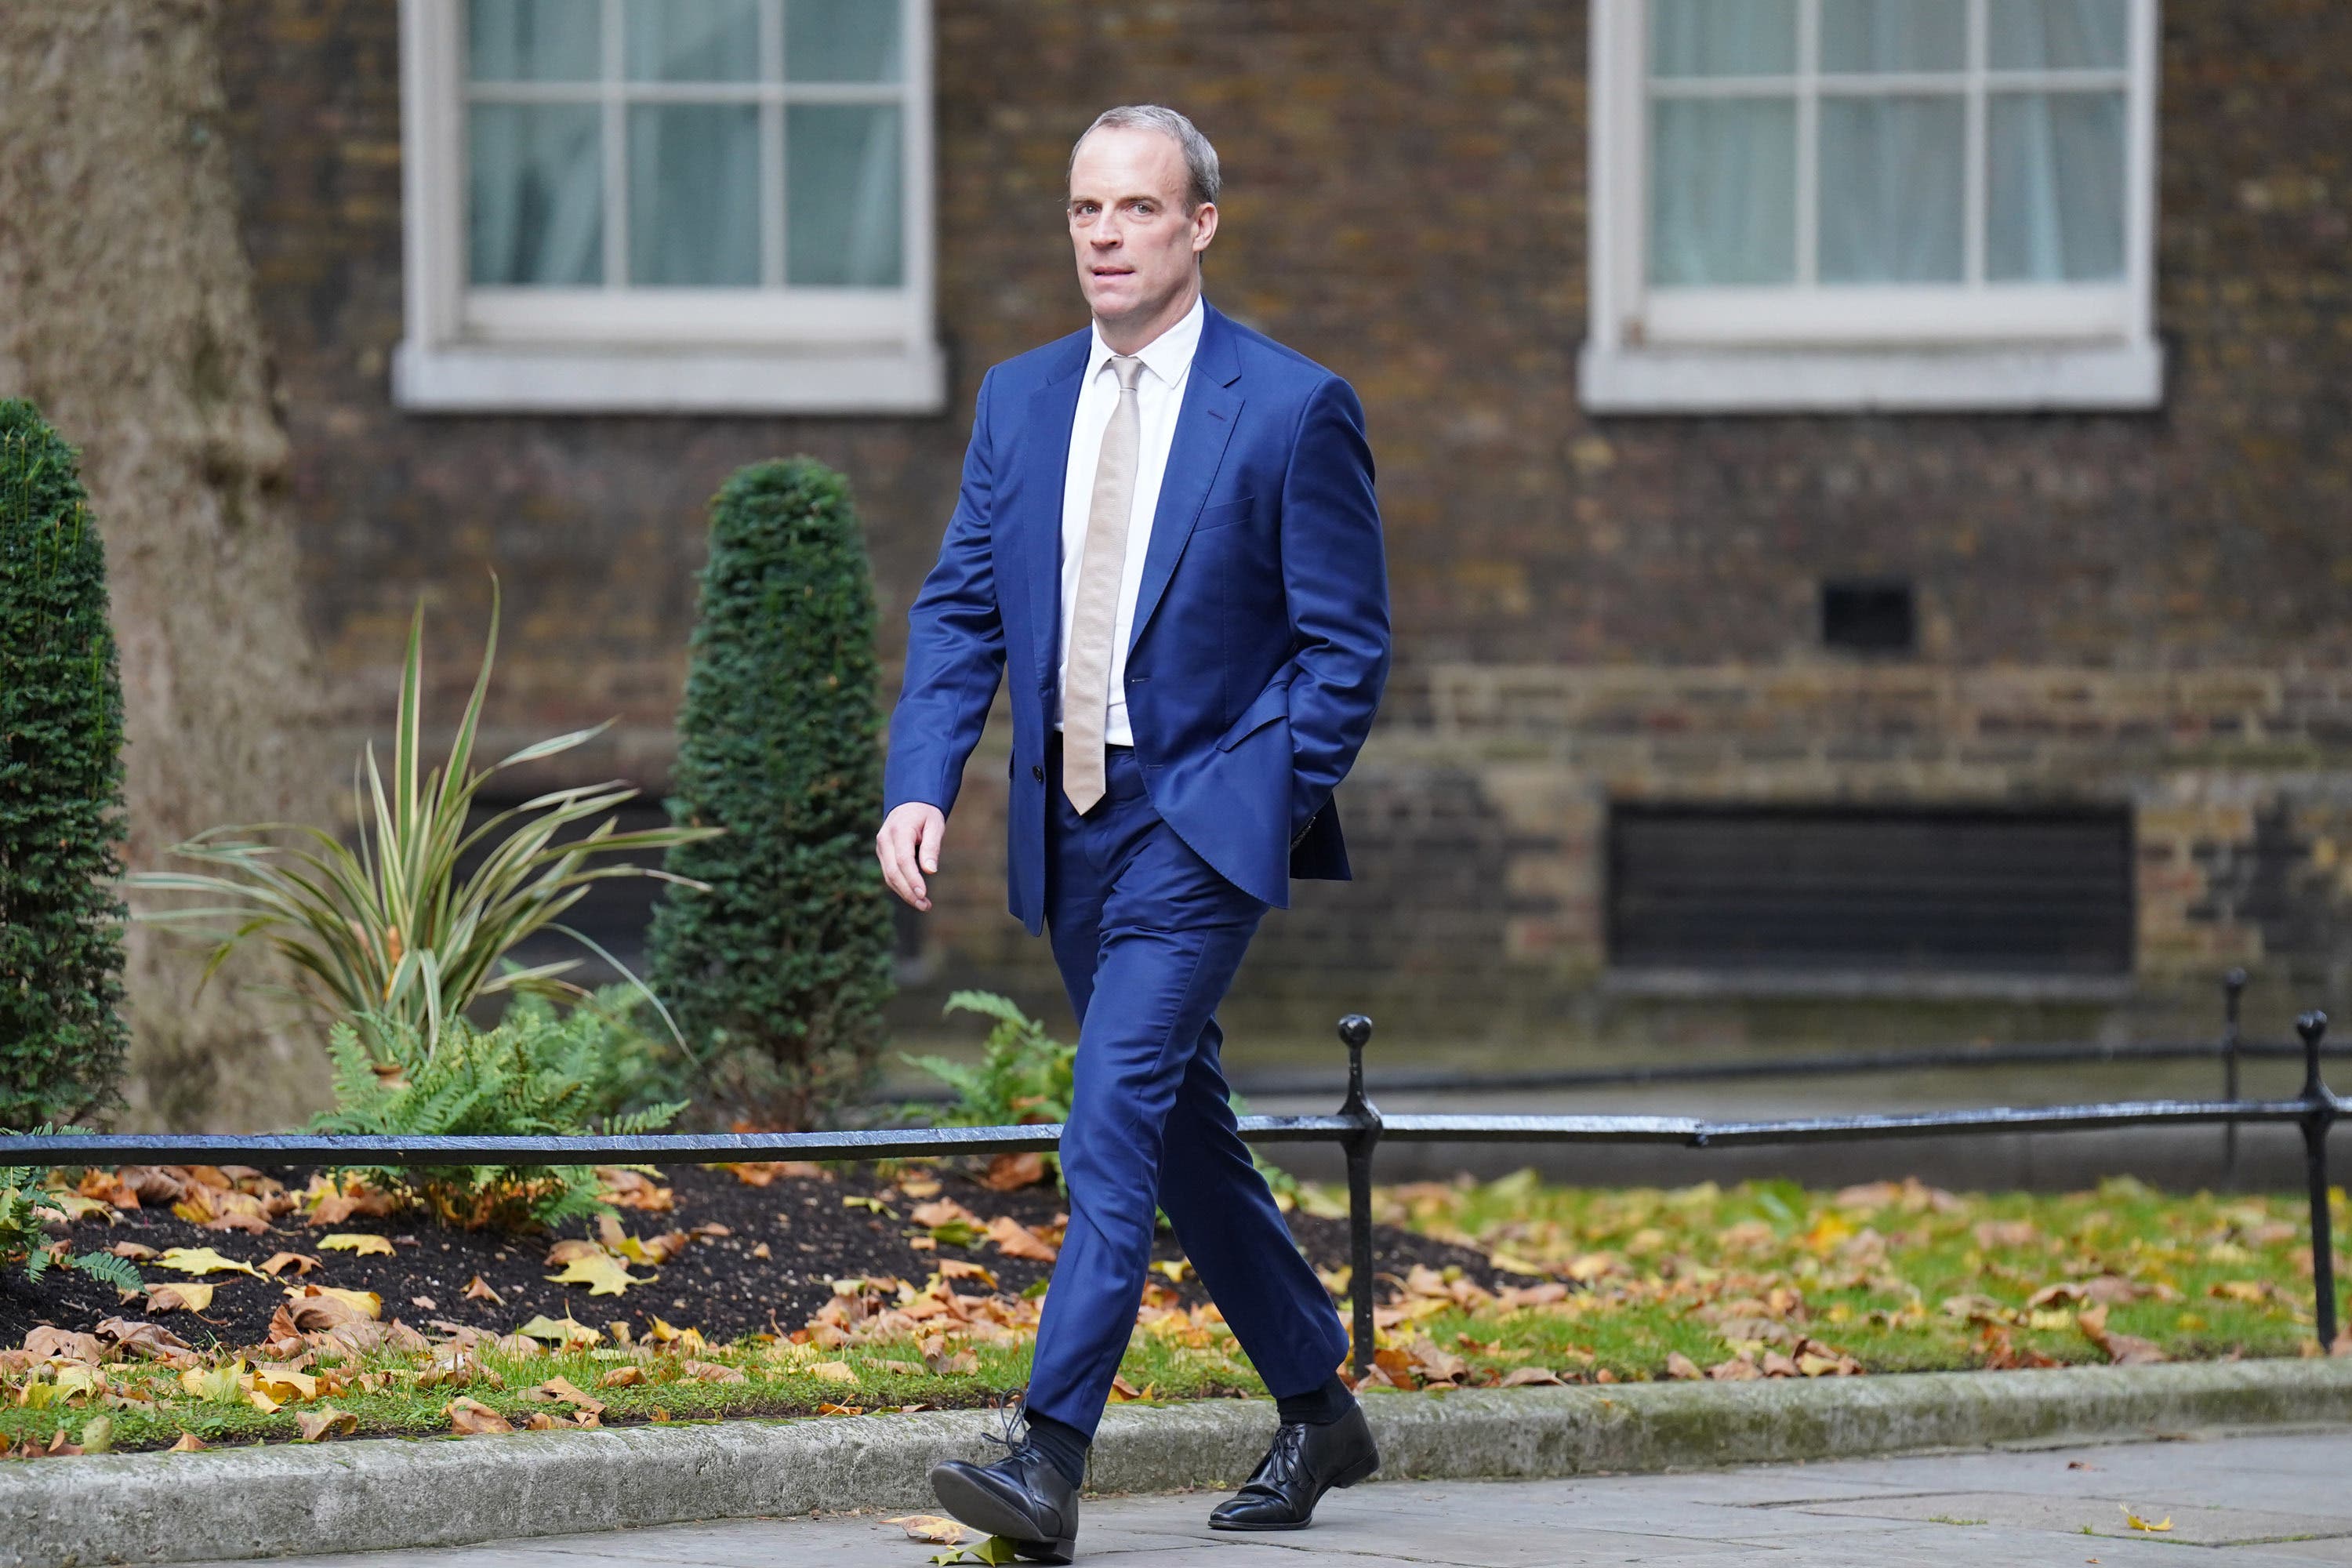 Dominic Raab arriving in Downing Street, London after Rishi Sunak has been appointed as Prime Minister (James Manning/PA)